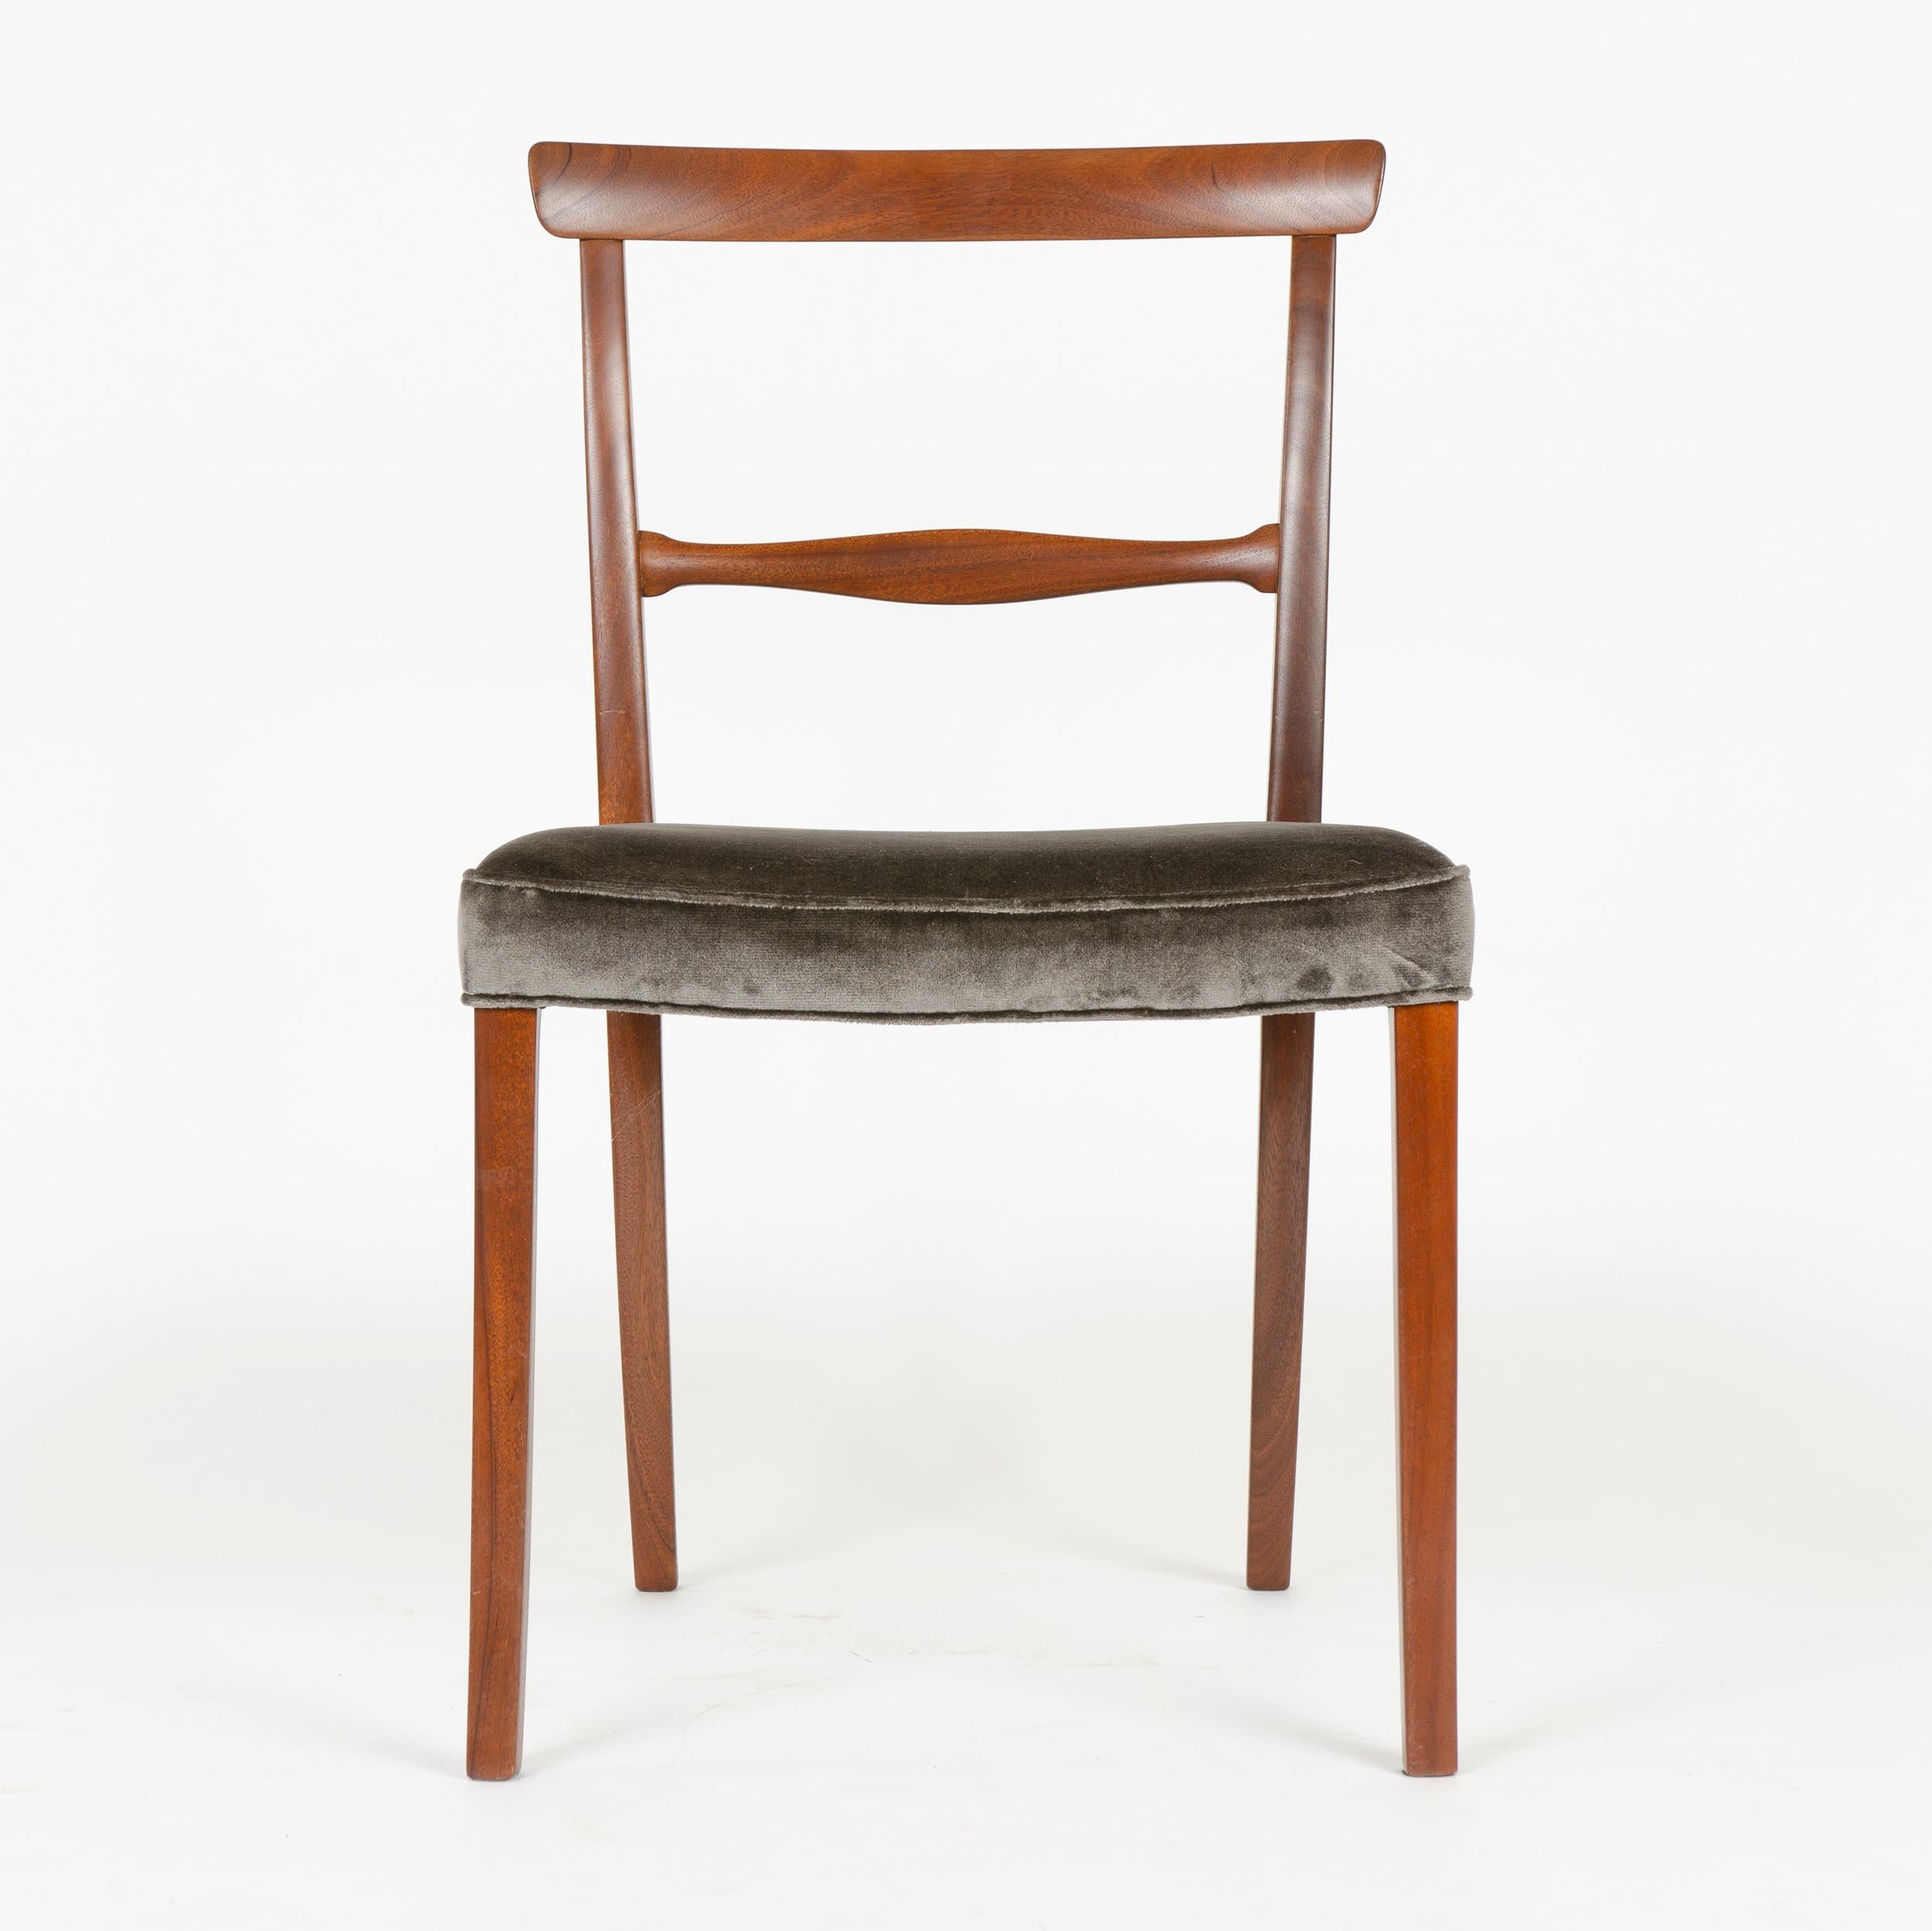 Designed in 1962, this expertly crafted dining chair by Ole Wanscher was built in the cabinet shop of A. J. Iversen of Brazilian rosewood in the 1960s. A graceful, minimal design consisting of only essential elements; a slight crest rail which